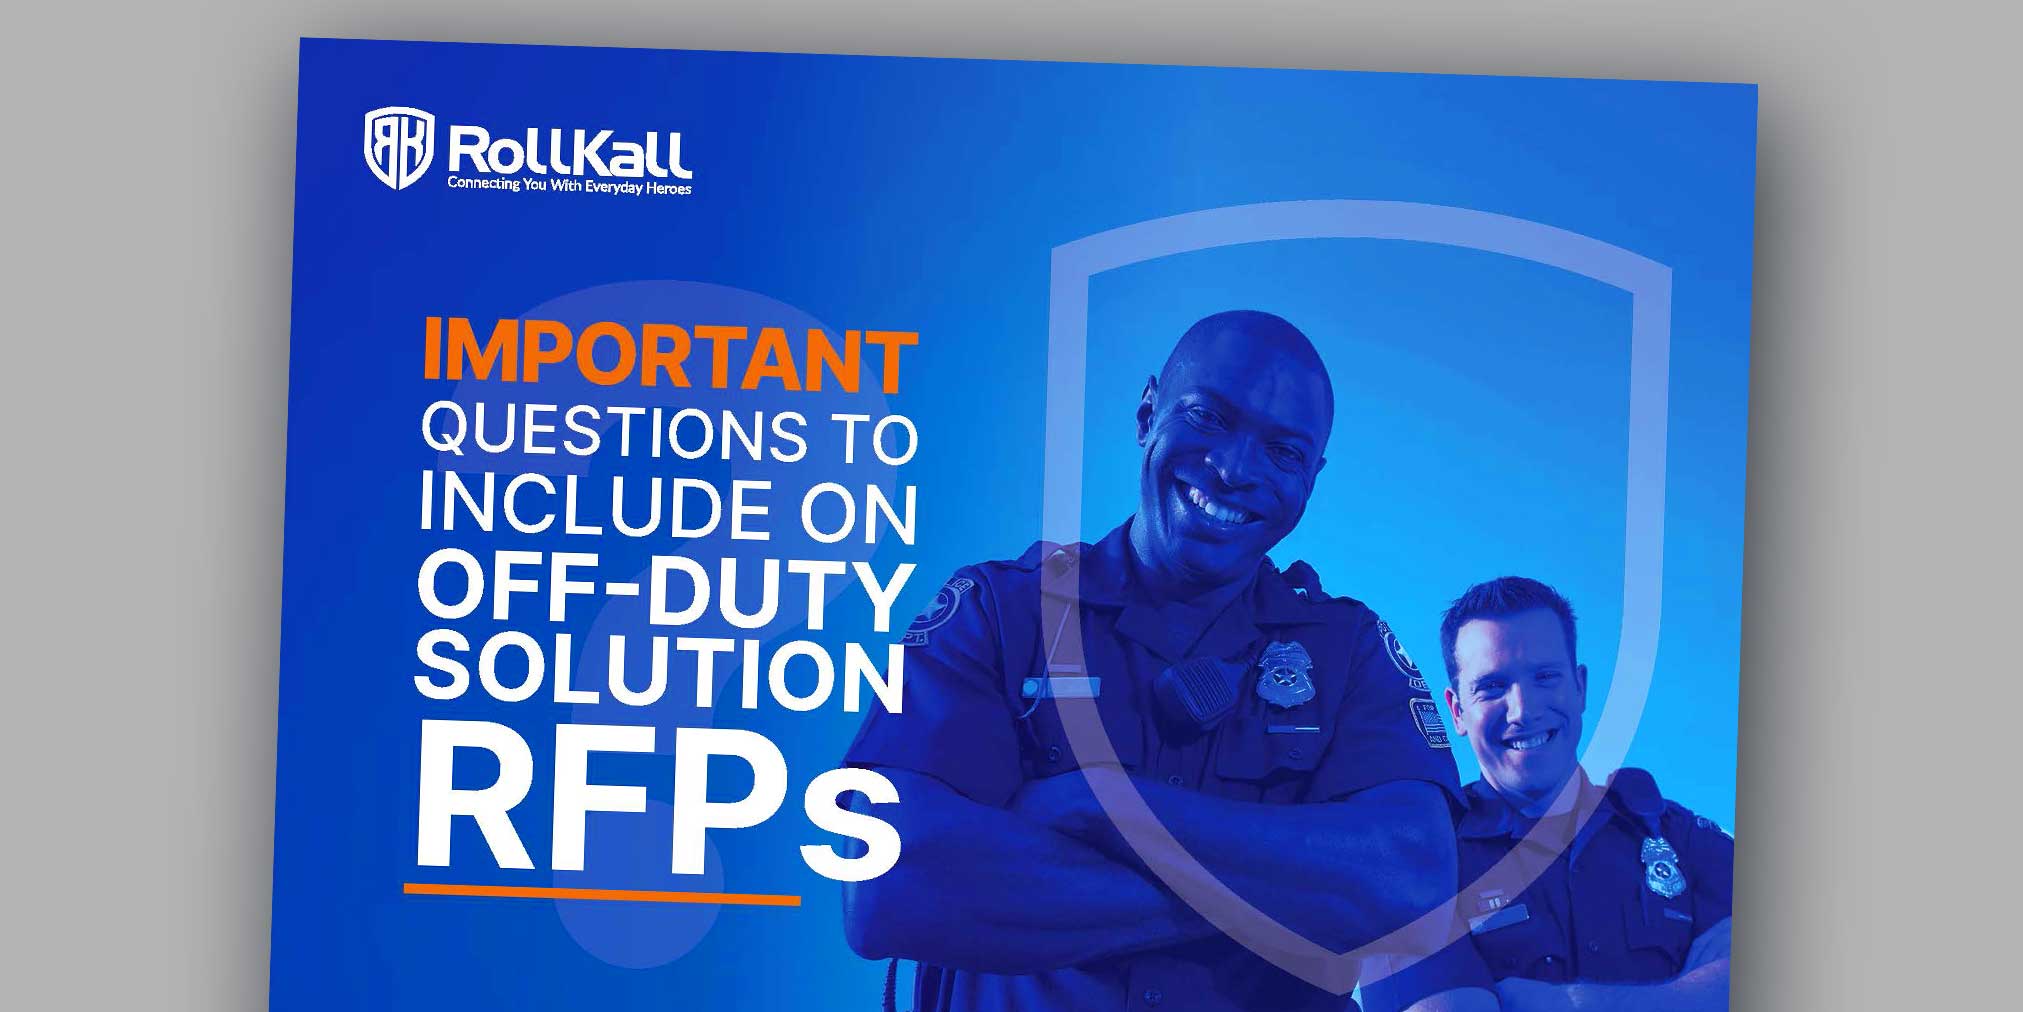 Guide: Important Questions to Include on Off-Duty Solution RFPs